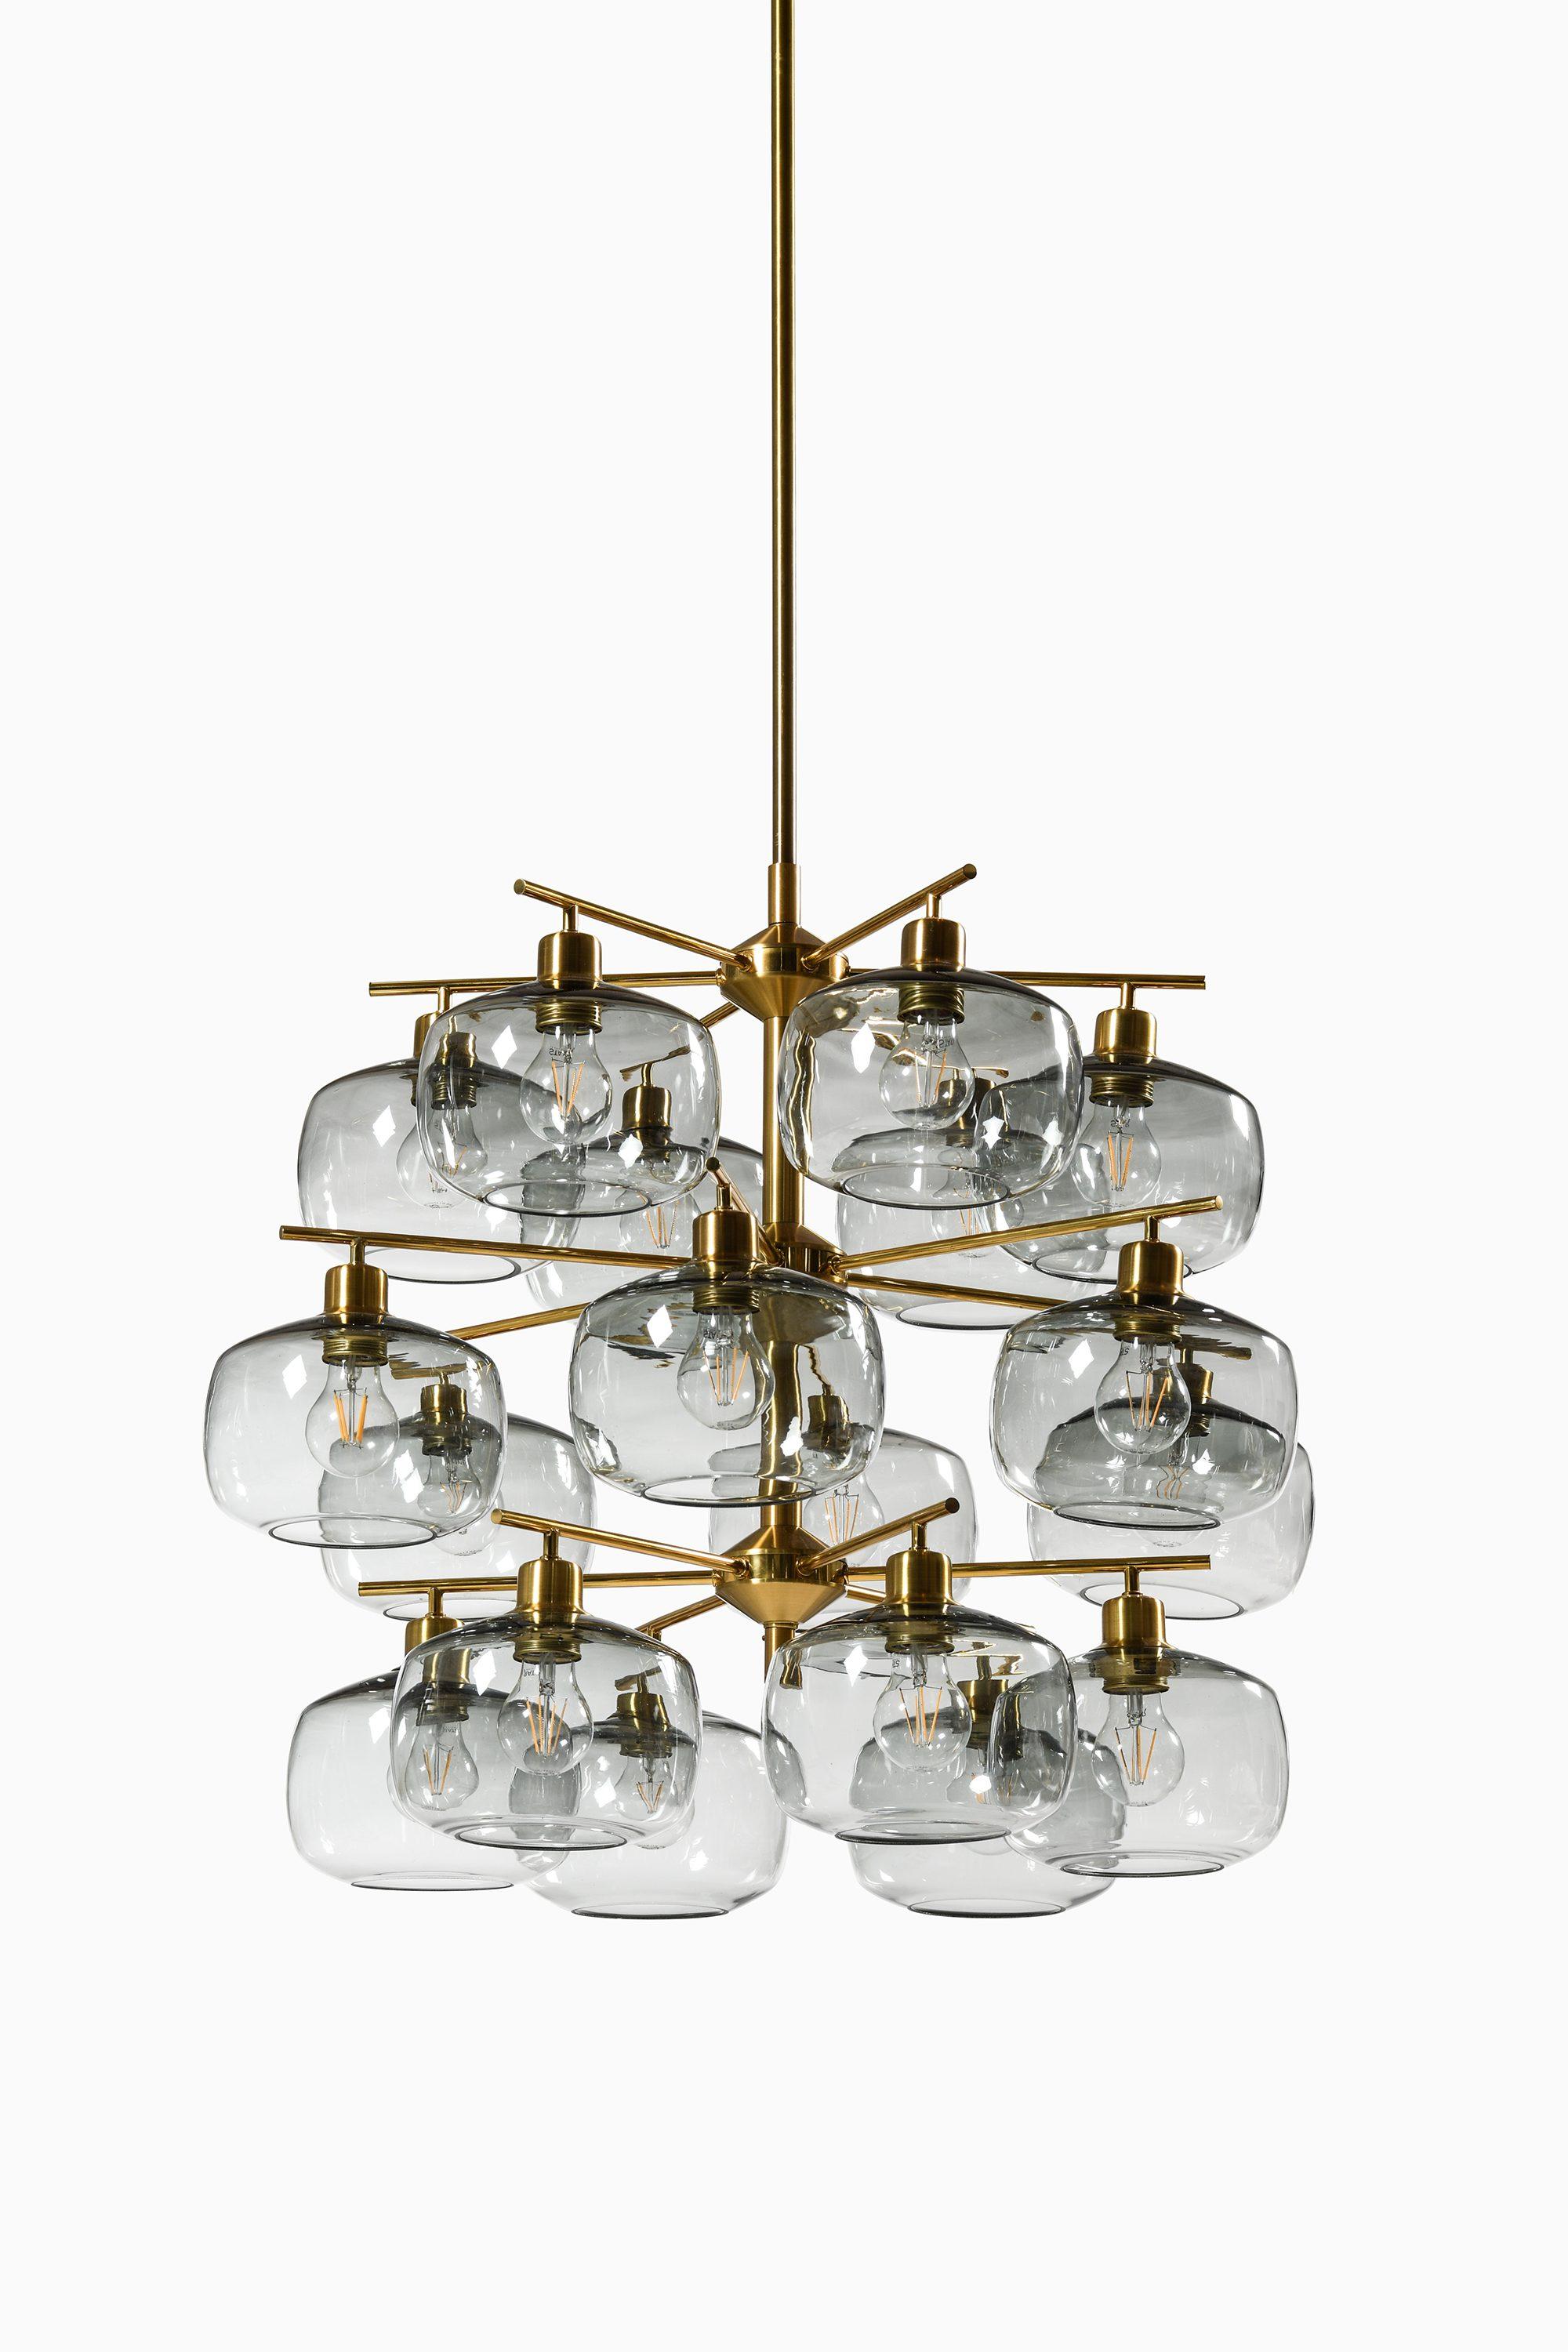 Large Ceiling Lamp in Brass and Glass by Holger Johansson, 1952

Additional Information:
Material: Brass and glass
Style: Mid century, Scandinavian
Produced by Westal in Sweden
Dimensions (W x D x H): 80 x 80 x 70 190 cm
Can be extended up to 4.2